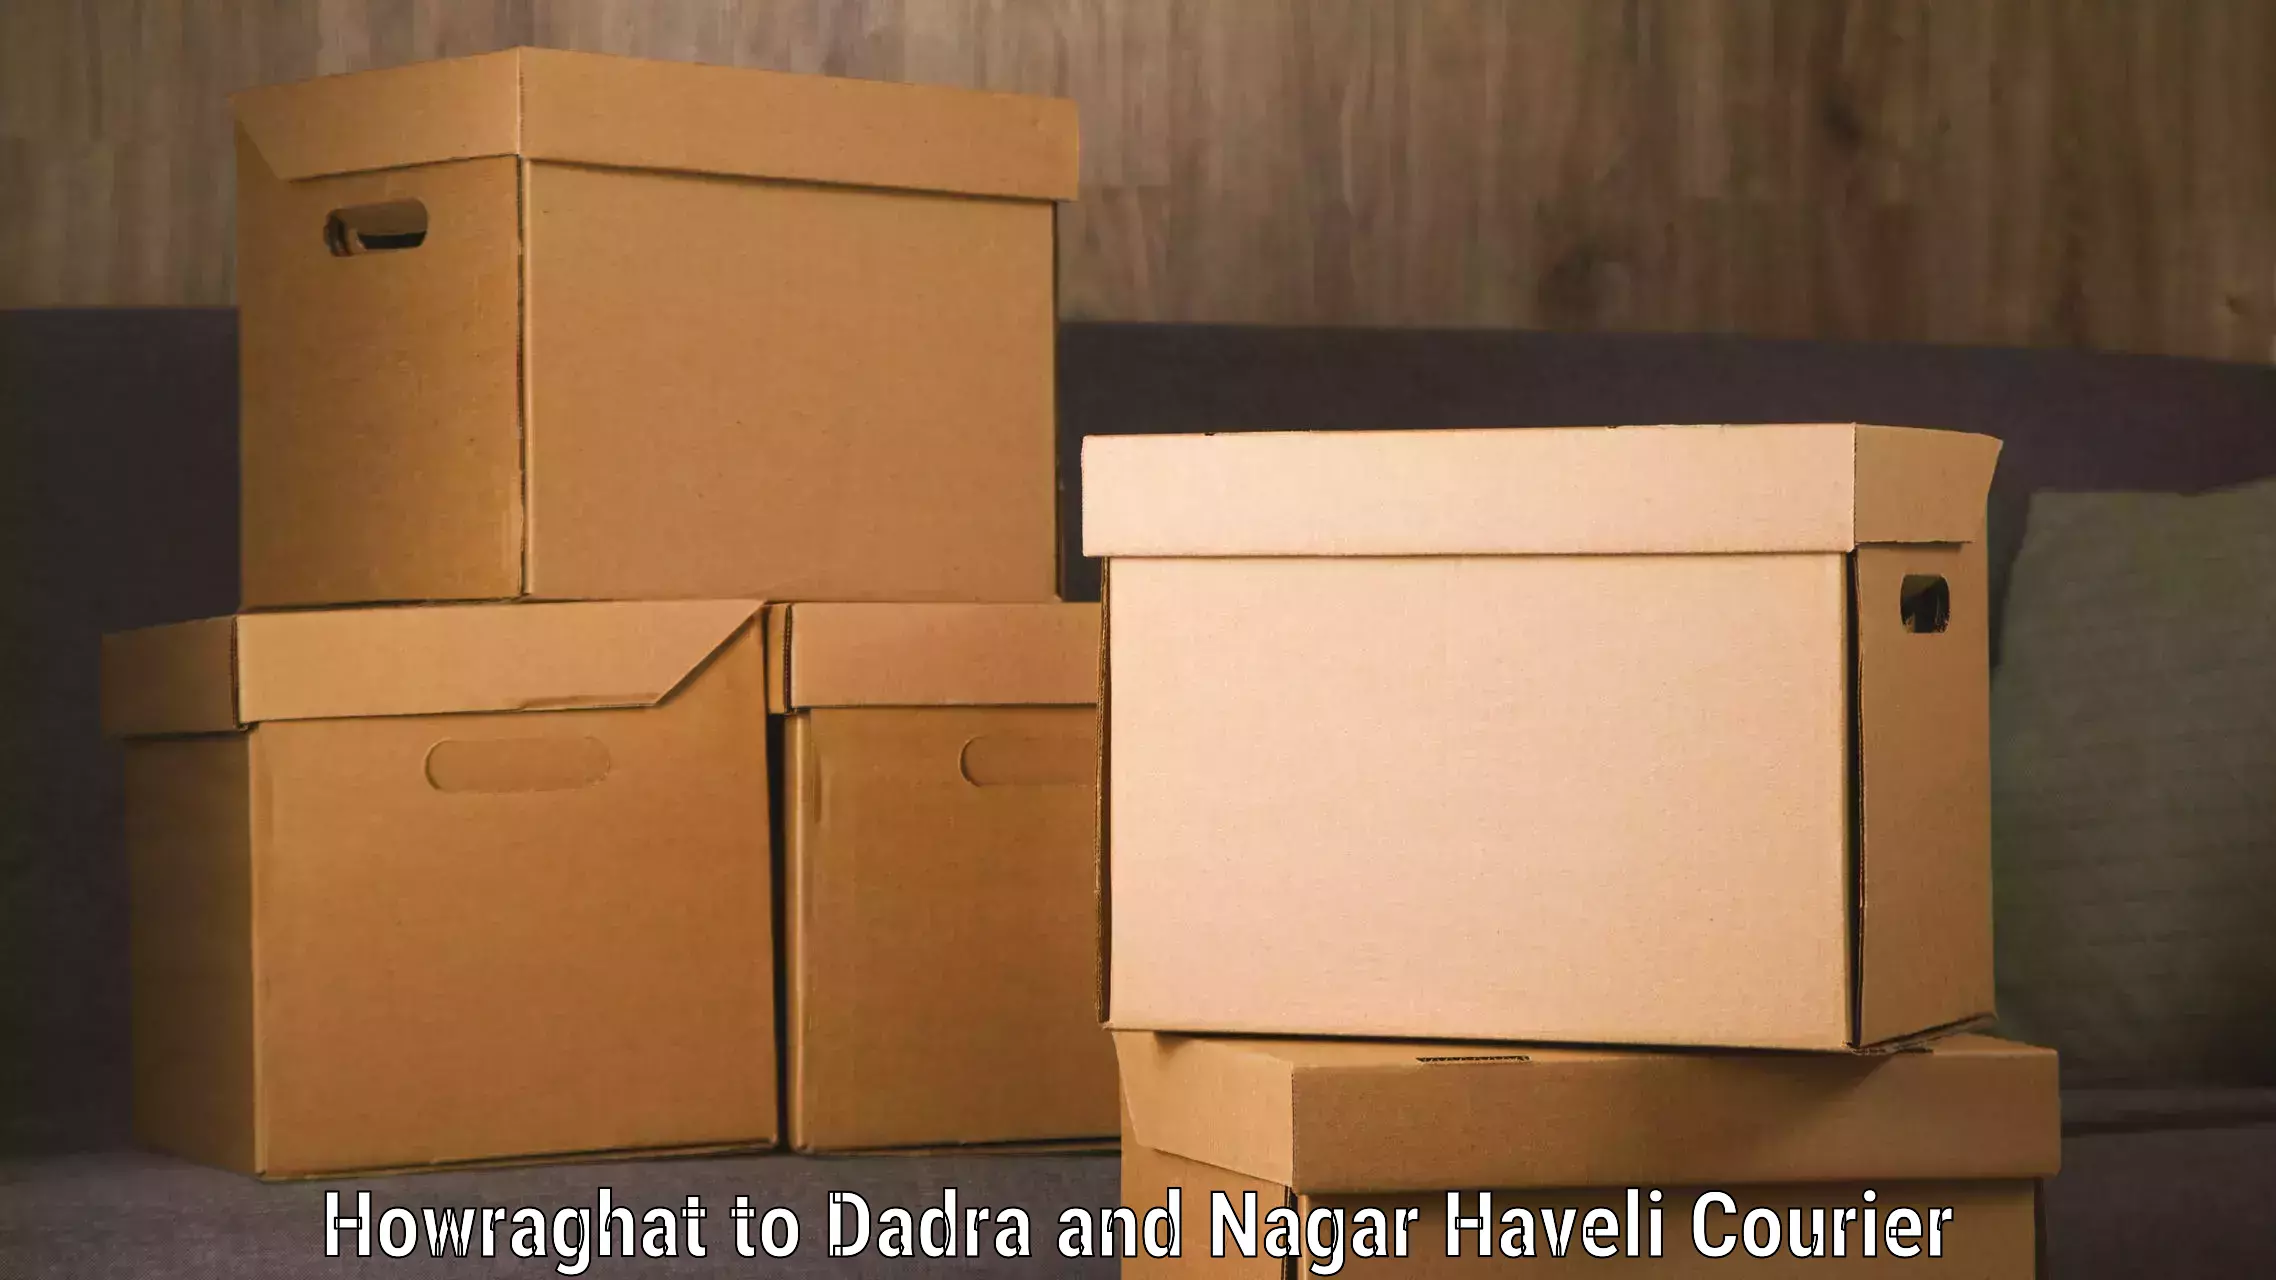 Luggage delivery logistics Howraghat to Dadra and Nagar Haveli